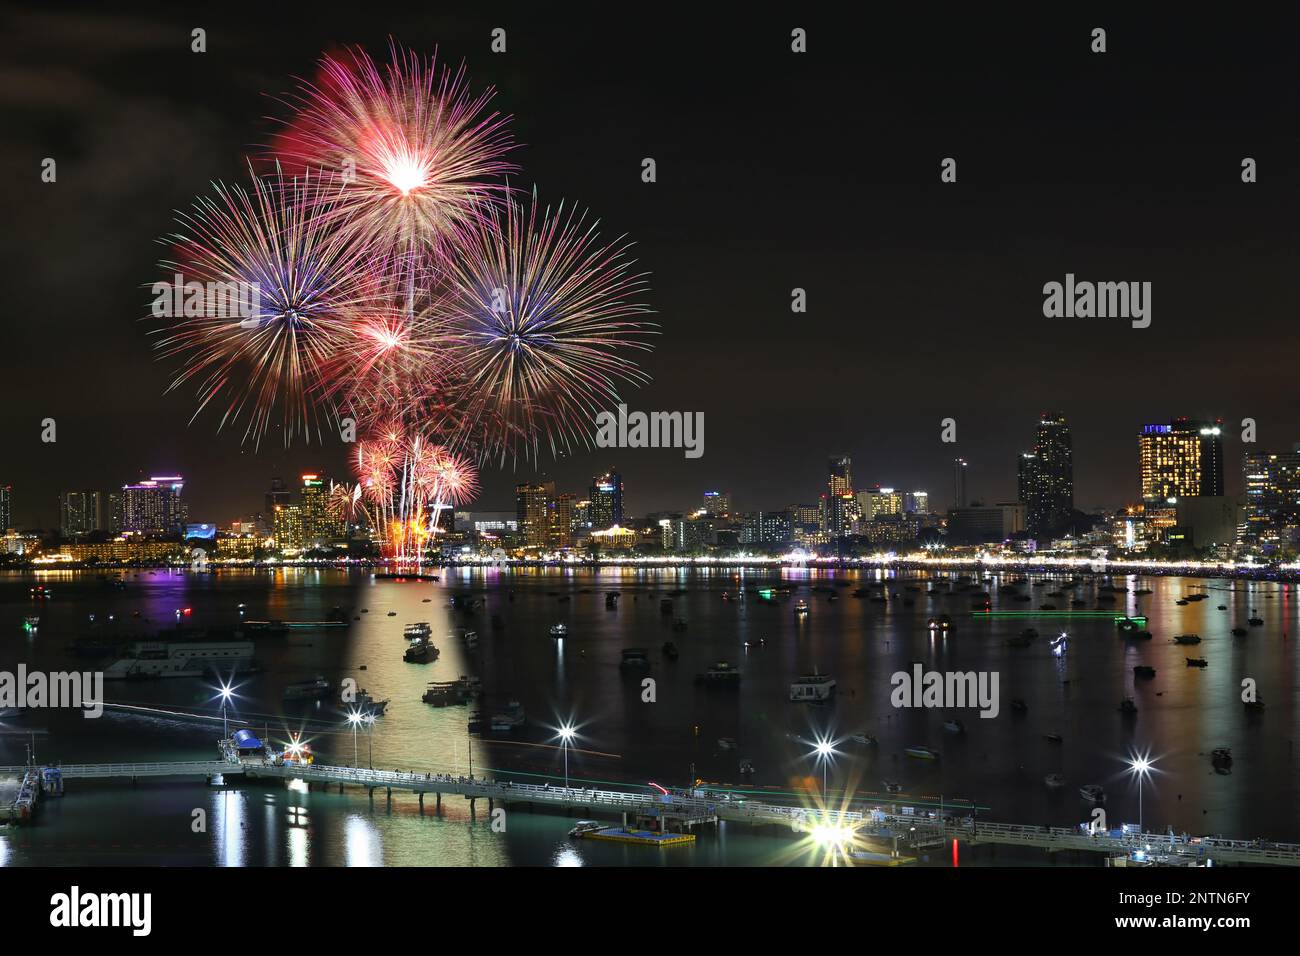 Fireworks show at Pattaya beach, Major attractions of Chonburi Province in Thailand. Stock Photo